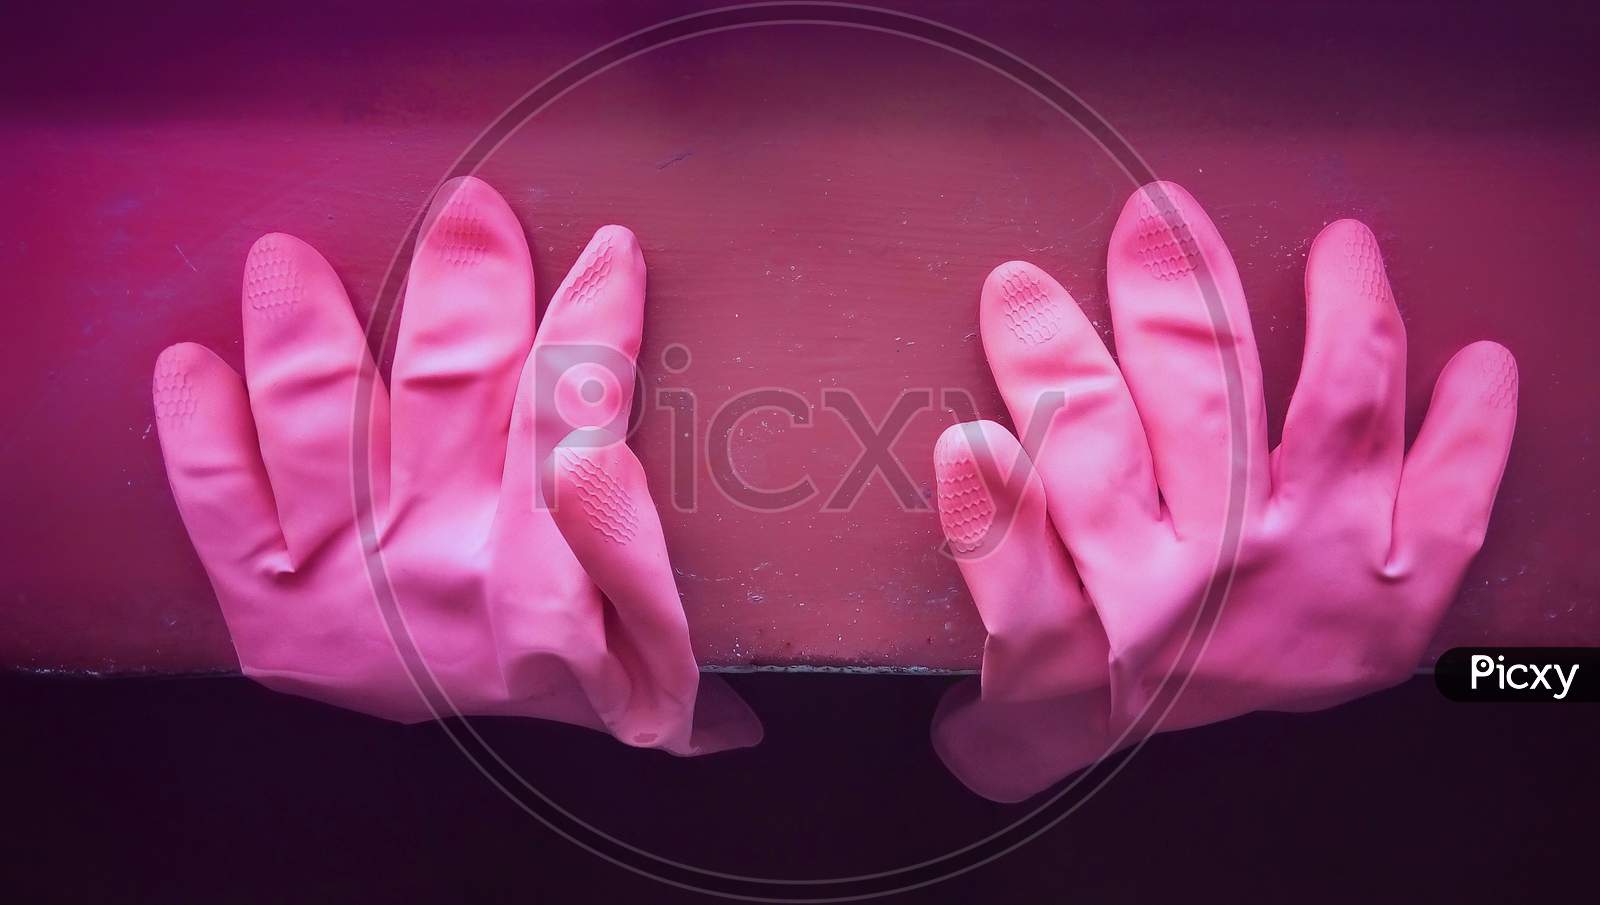 Pink Rubber hand gloves hygienic